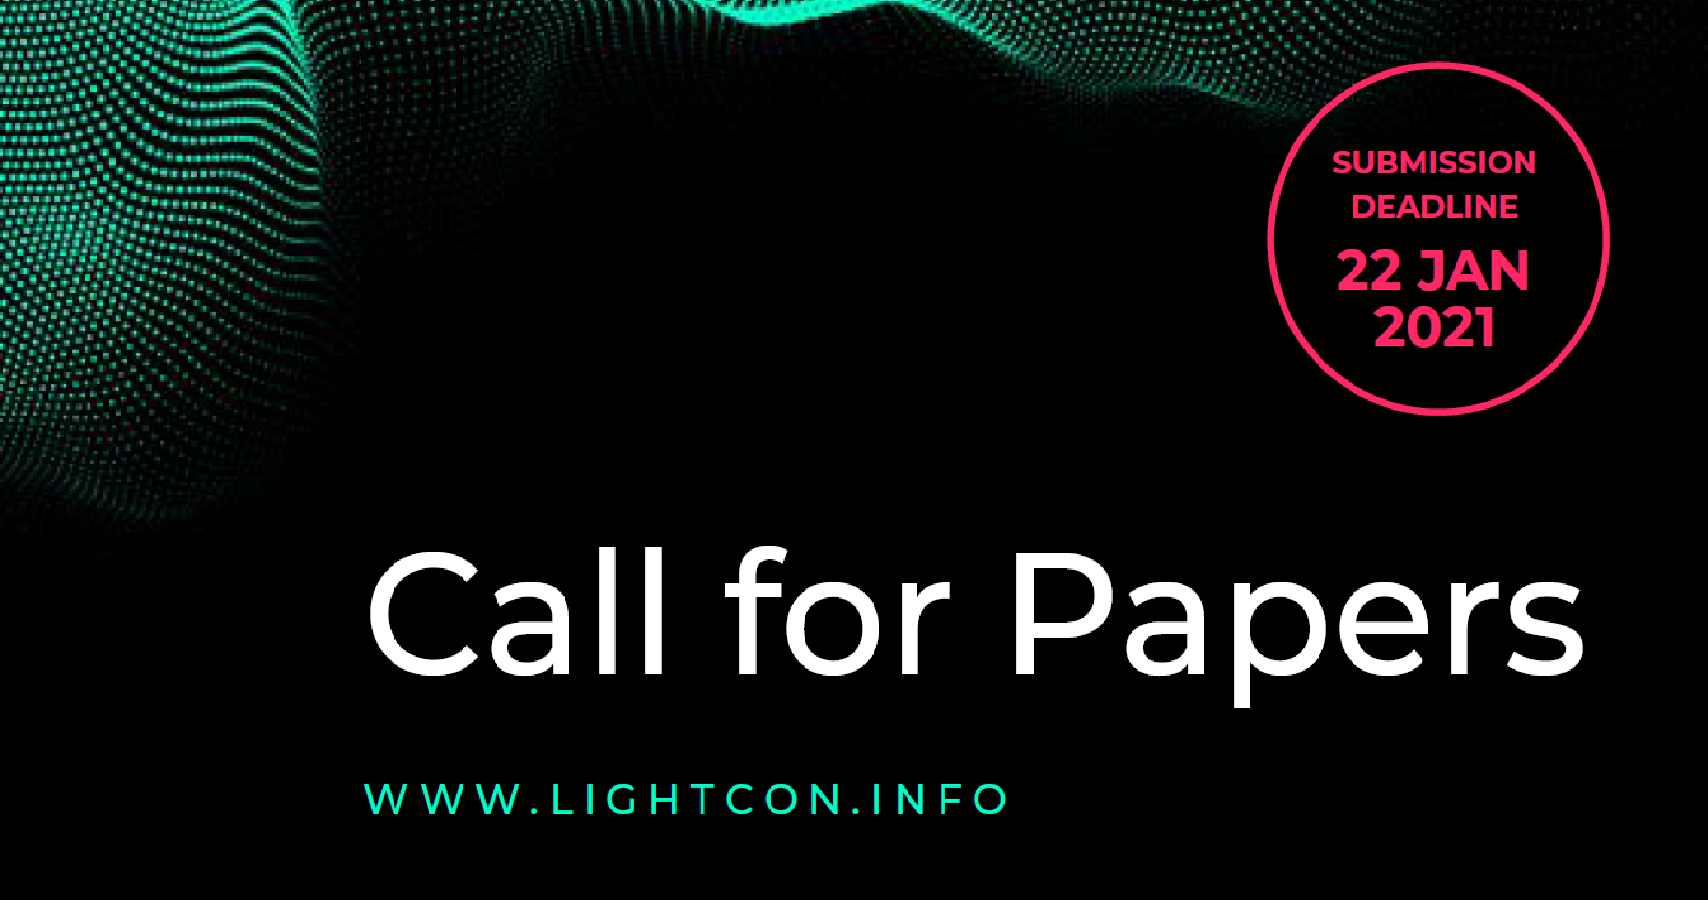 LightCon call for papers